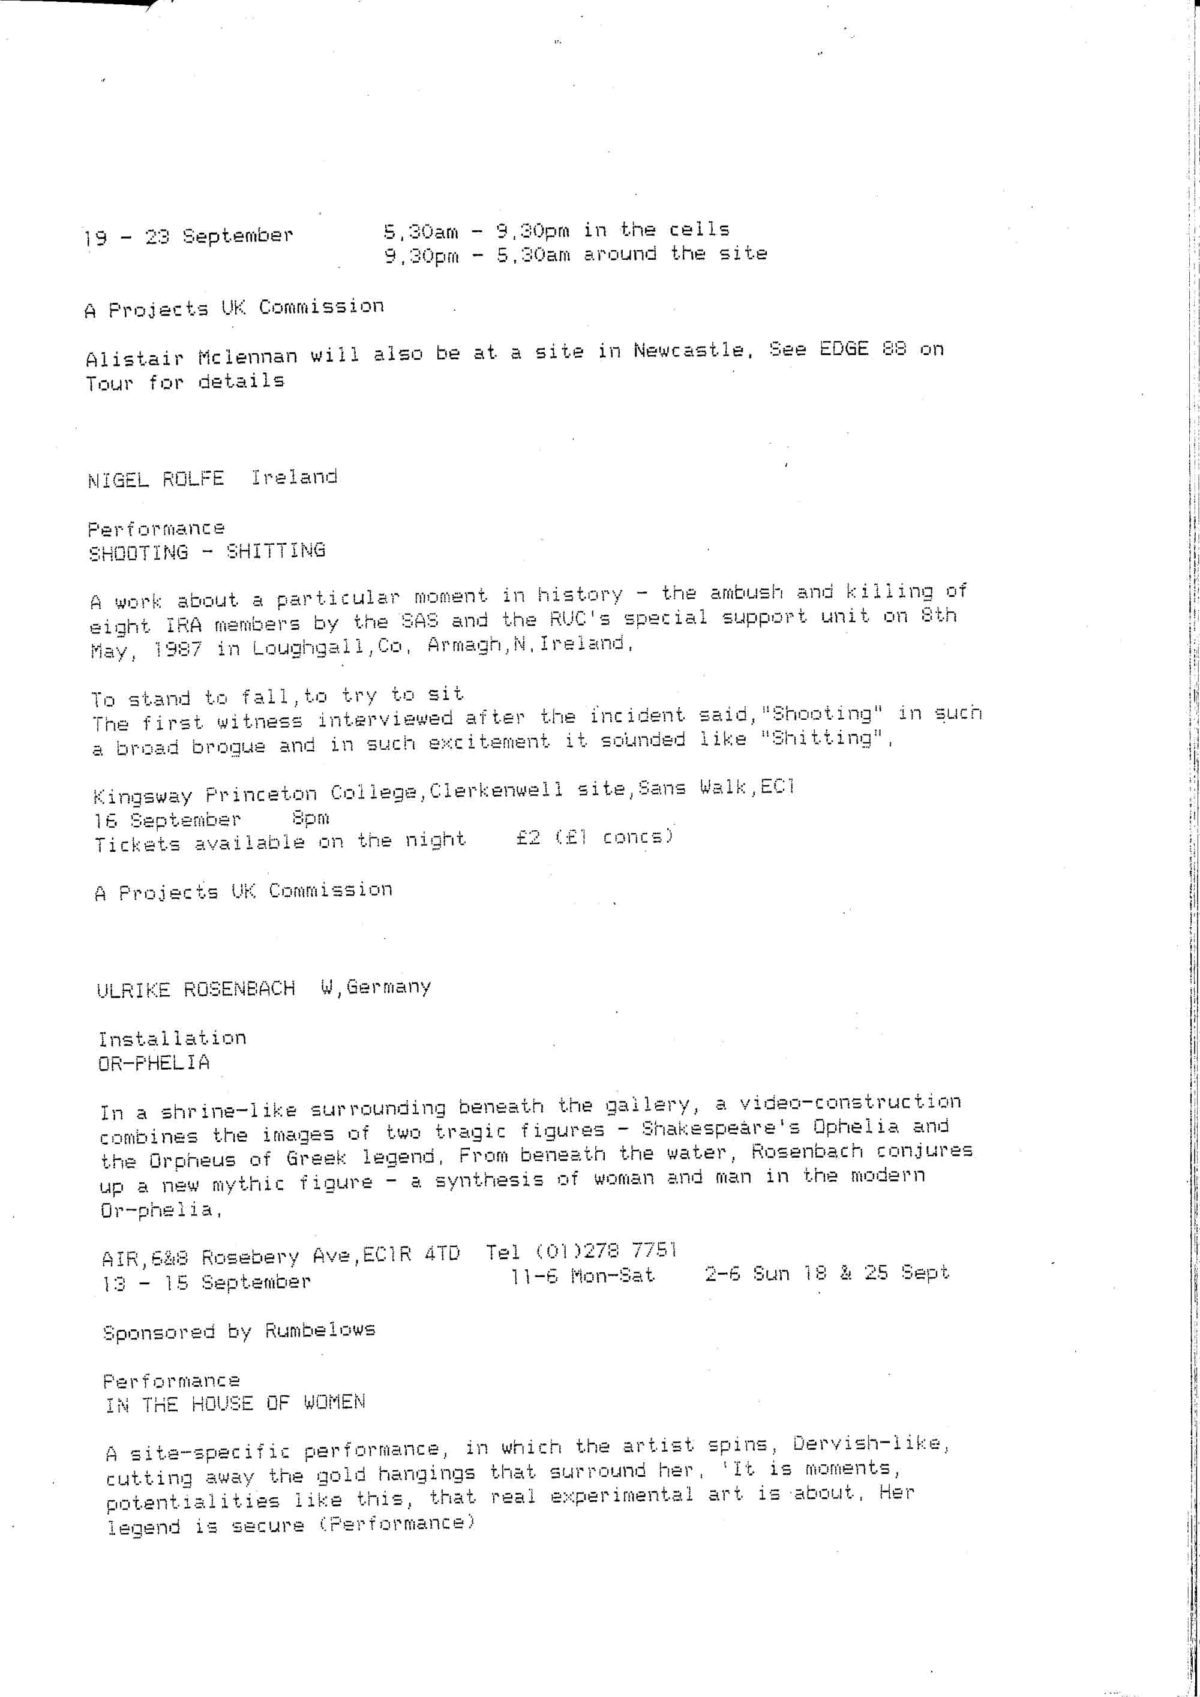 Full Programme Details, 1988 (Page 7 of 13)